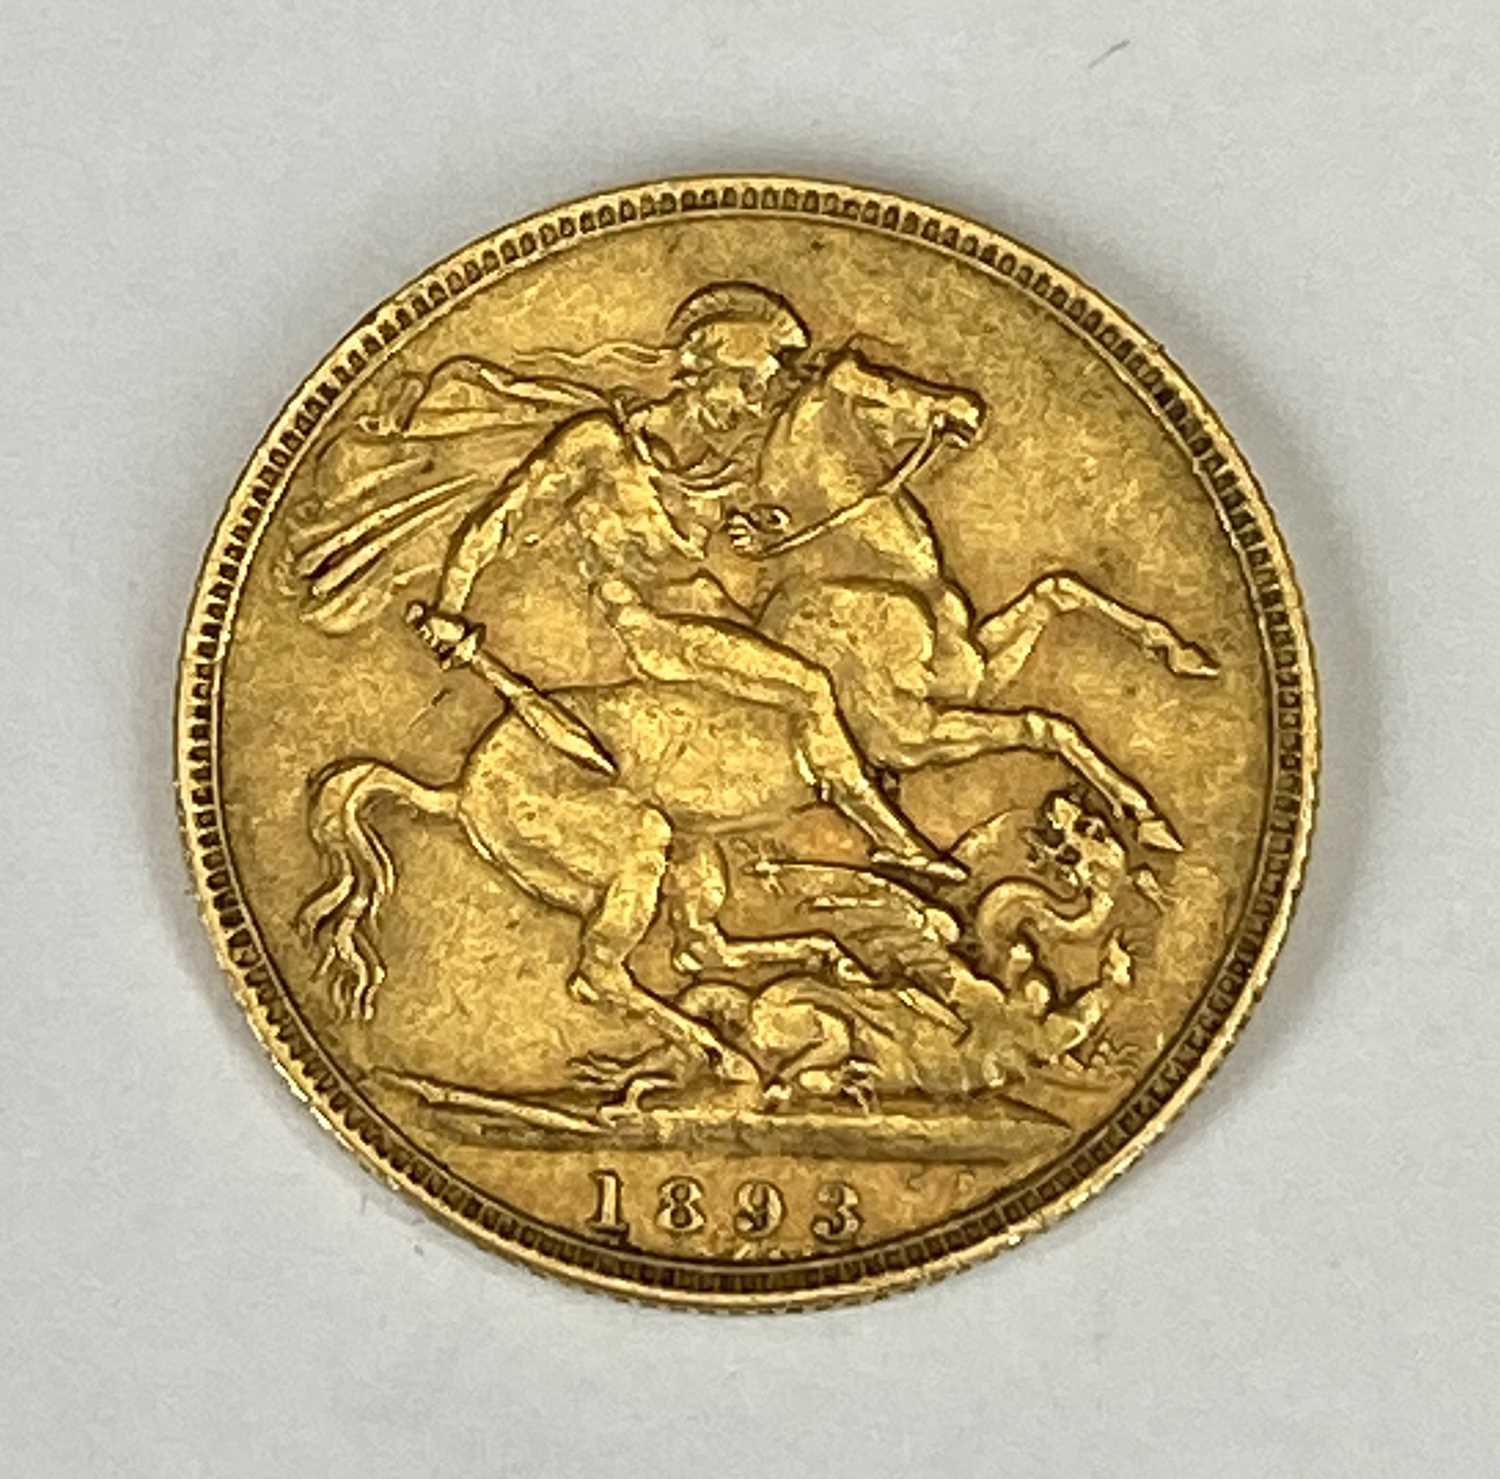 QUEEN VICTORIA VEILED BUST GOLD FULL SOVEREIGN, 1893, 8g Provenance: private collection Gwynedd